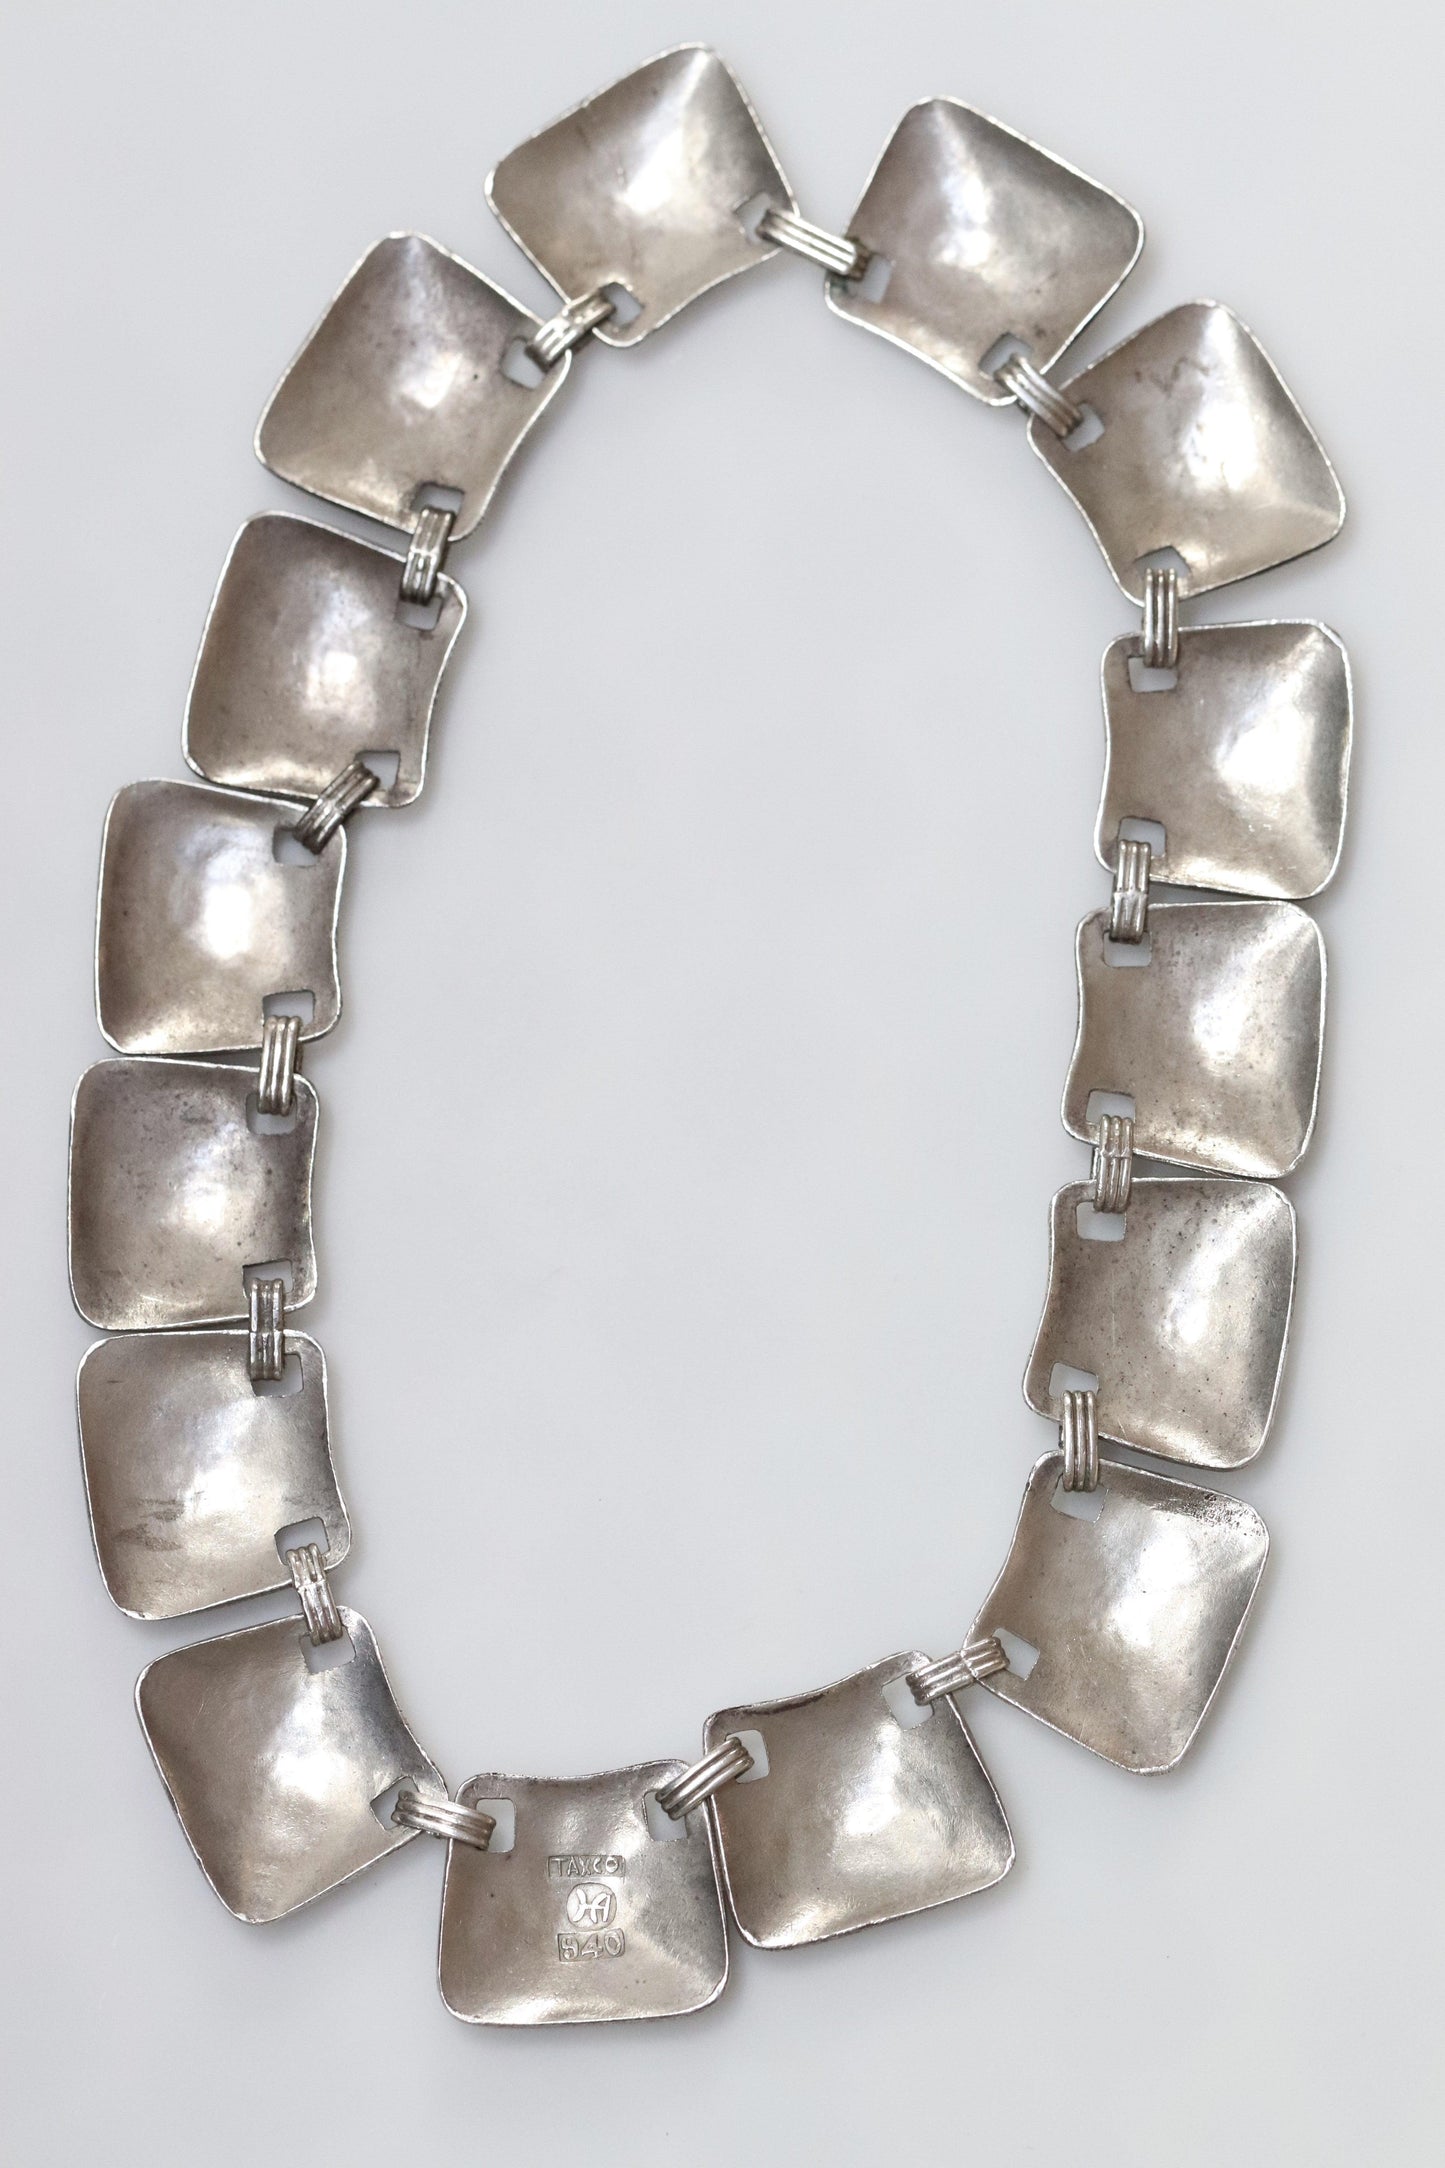 Vintage Hector Aguilar Taxco Silver Mexican Jewelry | Modernist 990 Silver Panel Choker Necklace - Carmel Fine Silver Jewelry